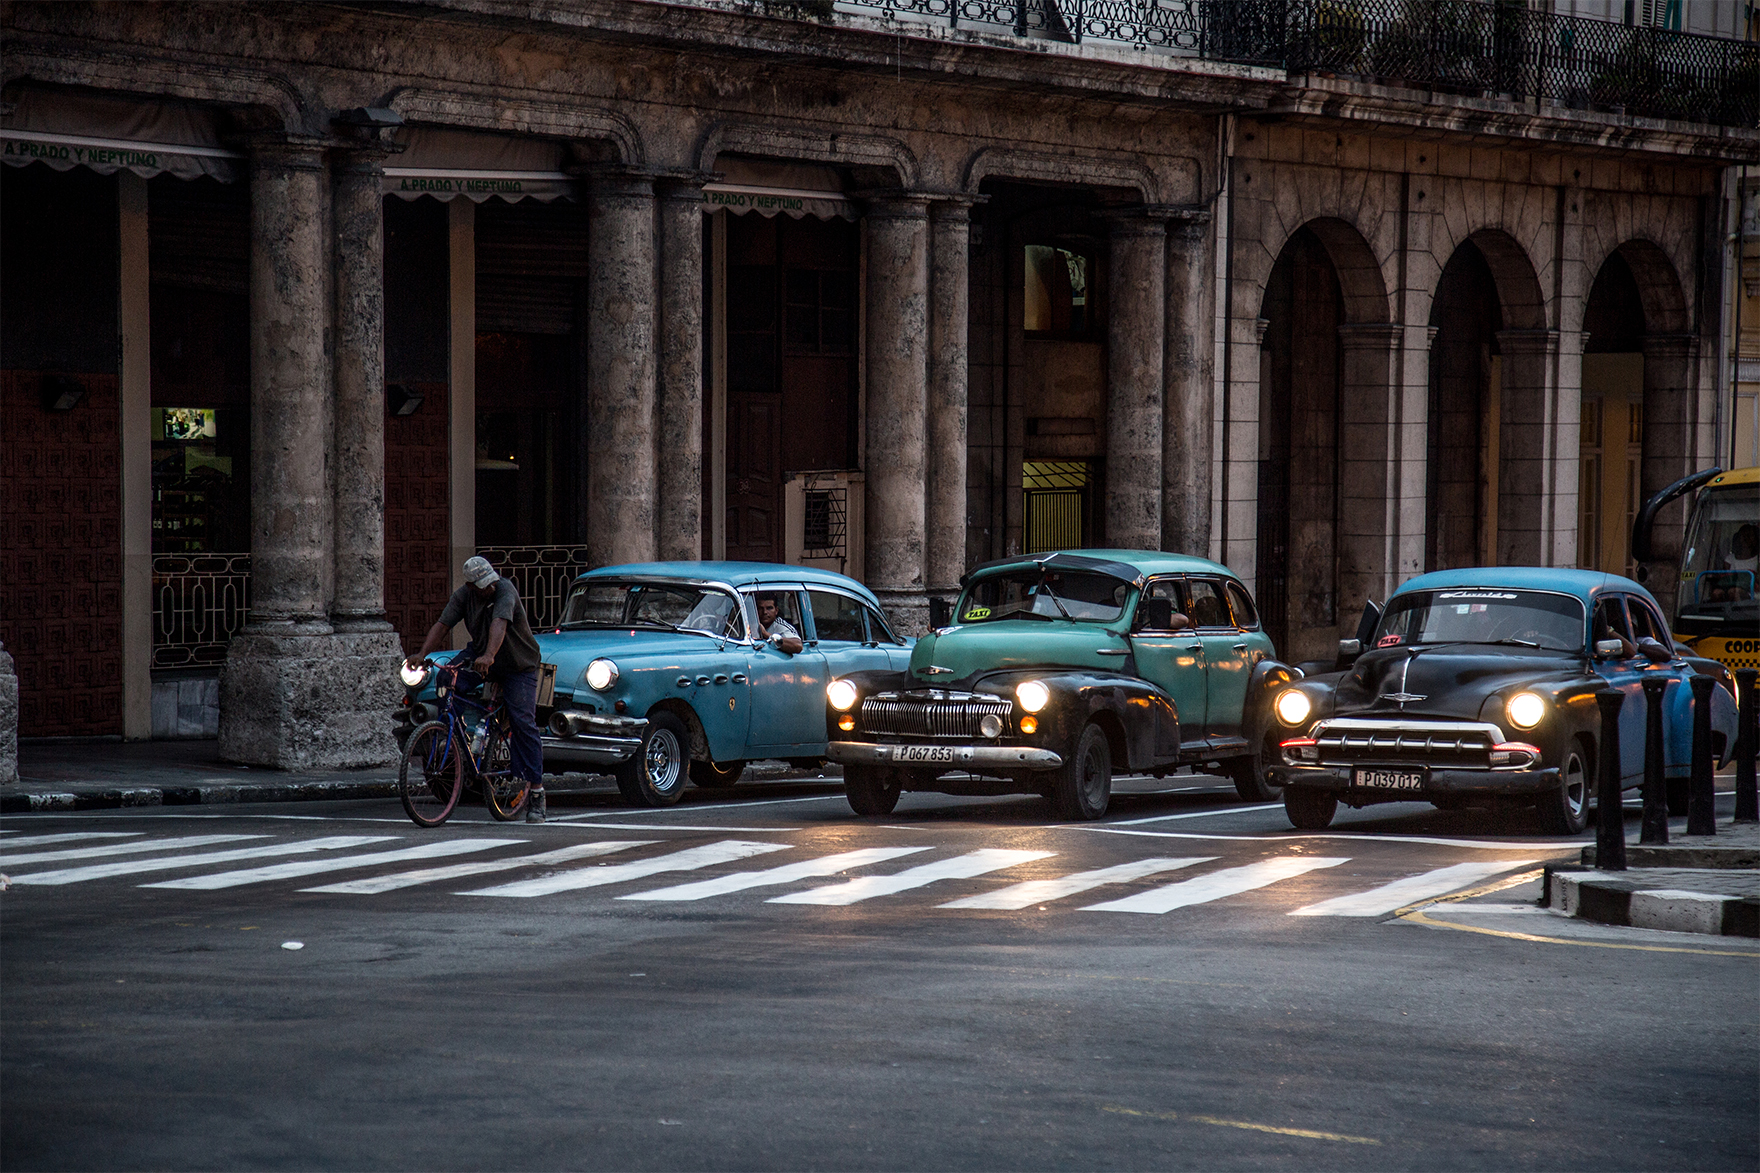 cuba vintage cars lined up at a zebra crossing in front of a portico